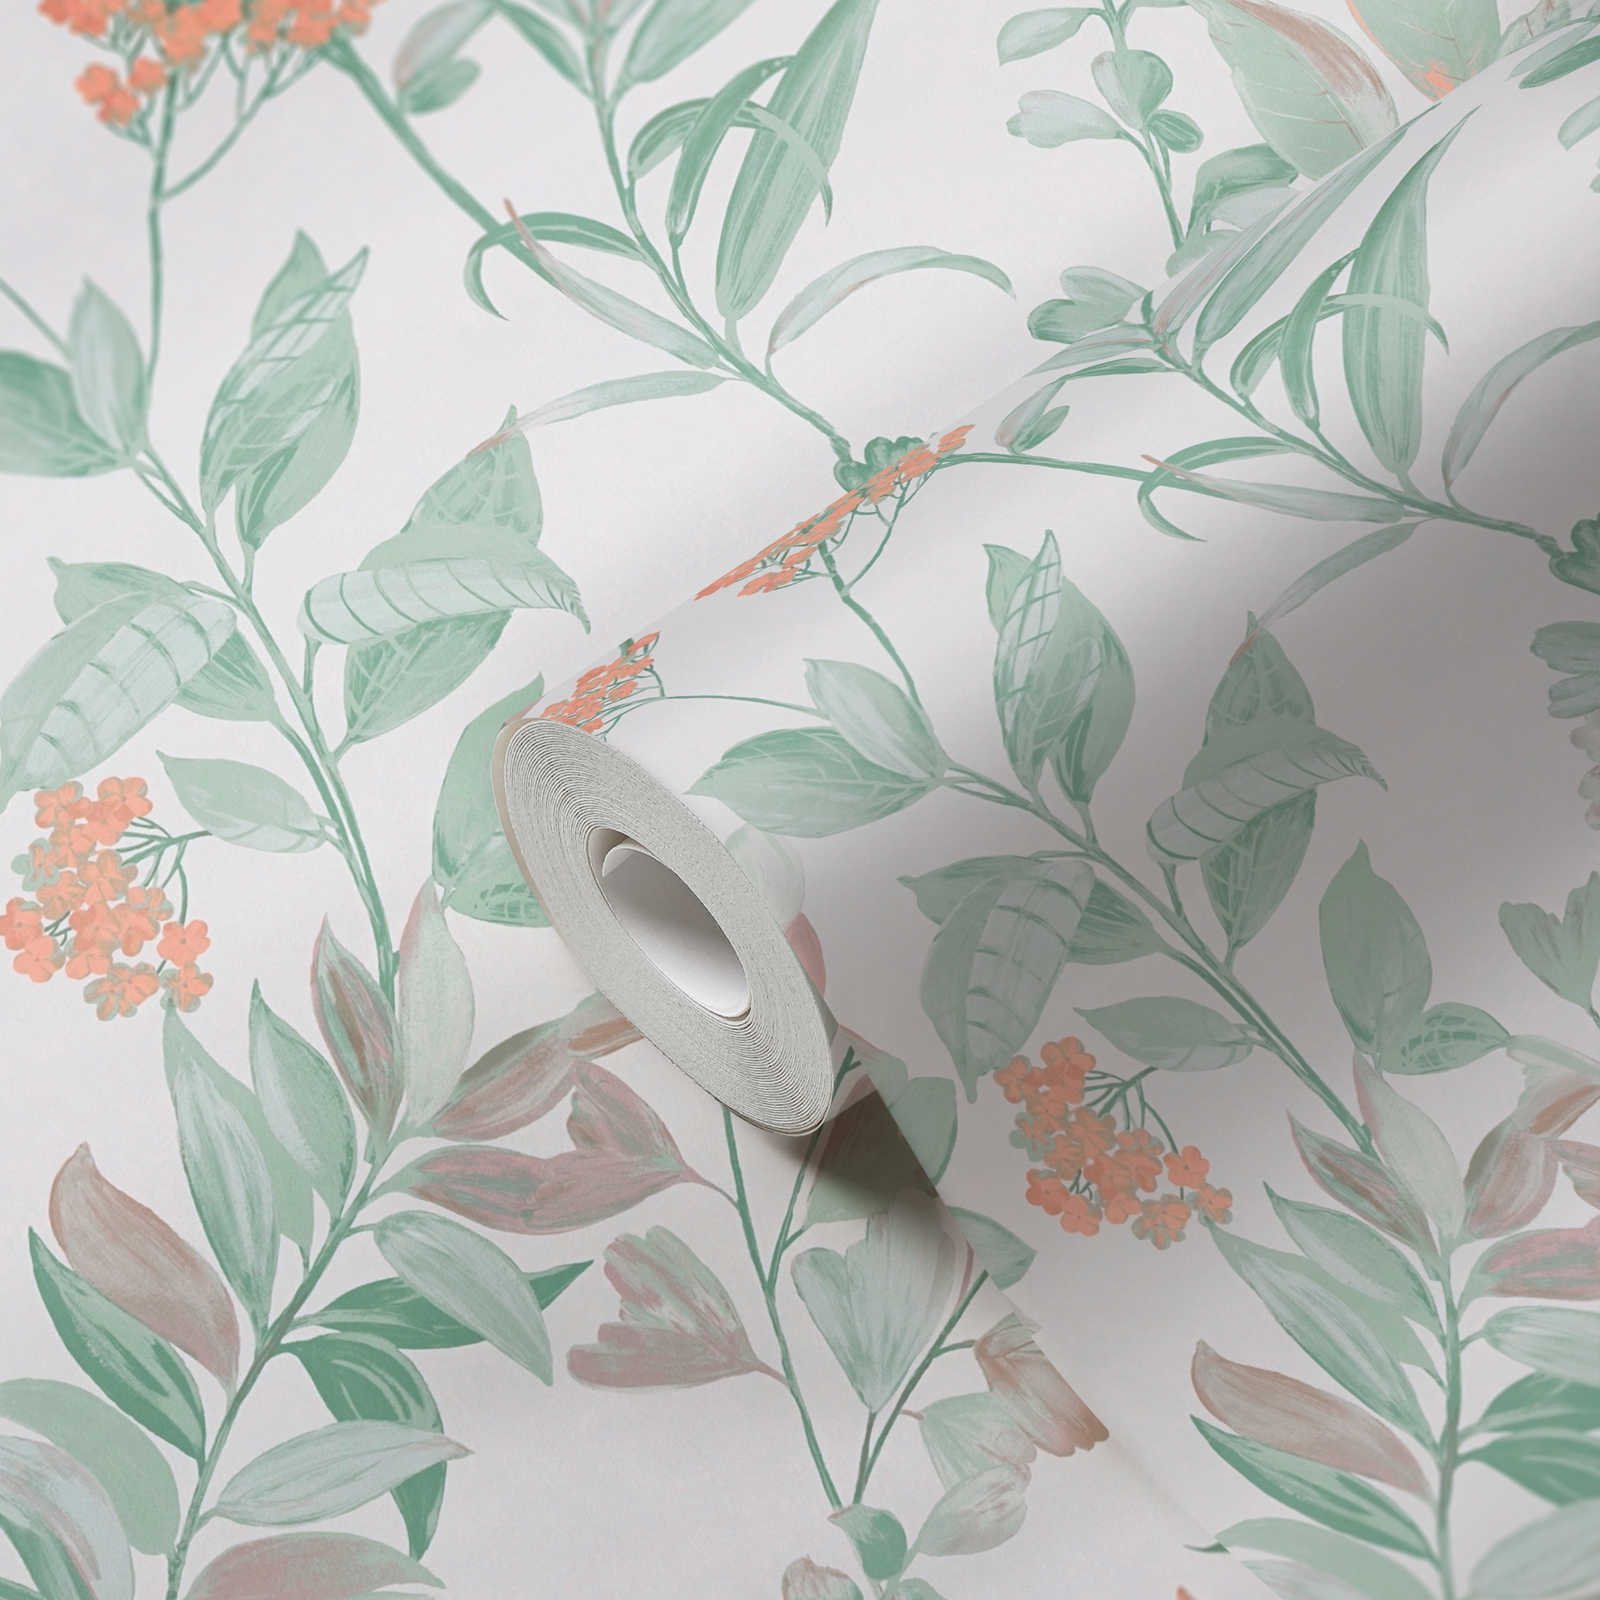             Non-woven wallpaper with floral pattern - multicoloured, green, white
        